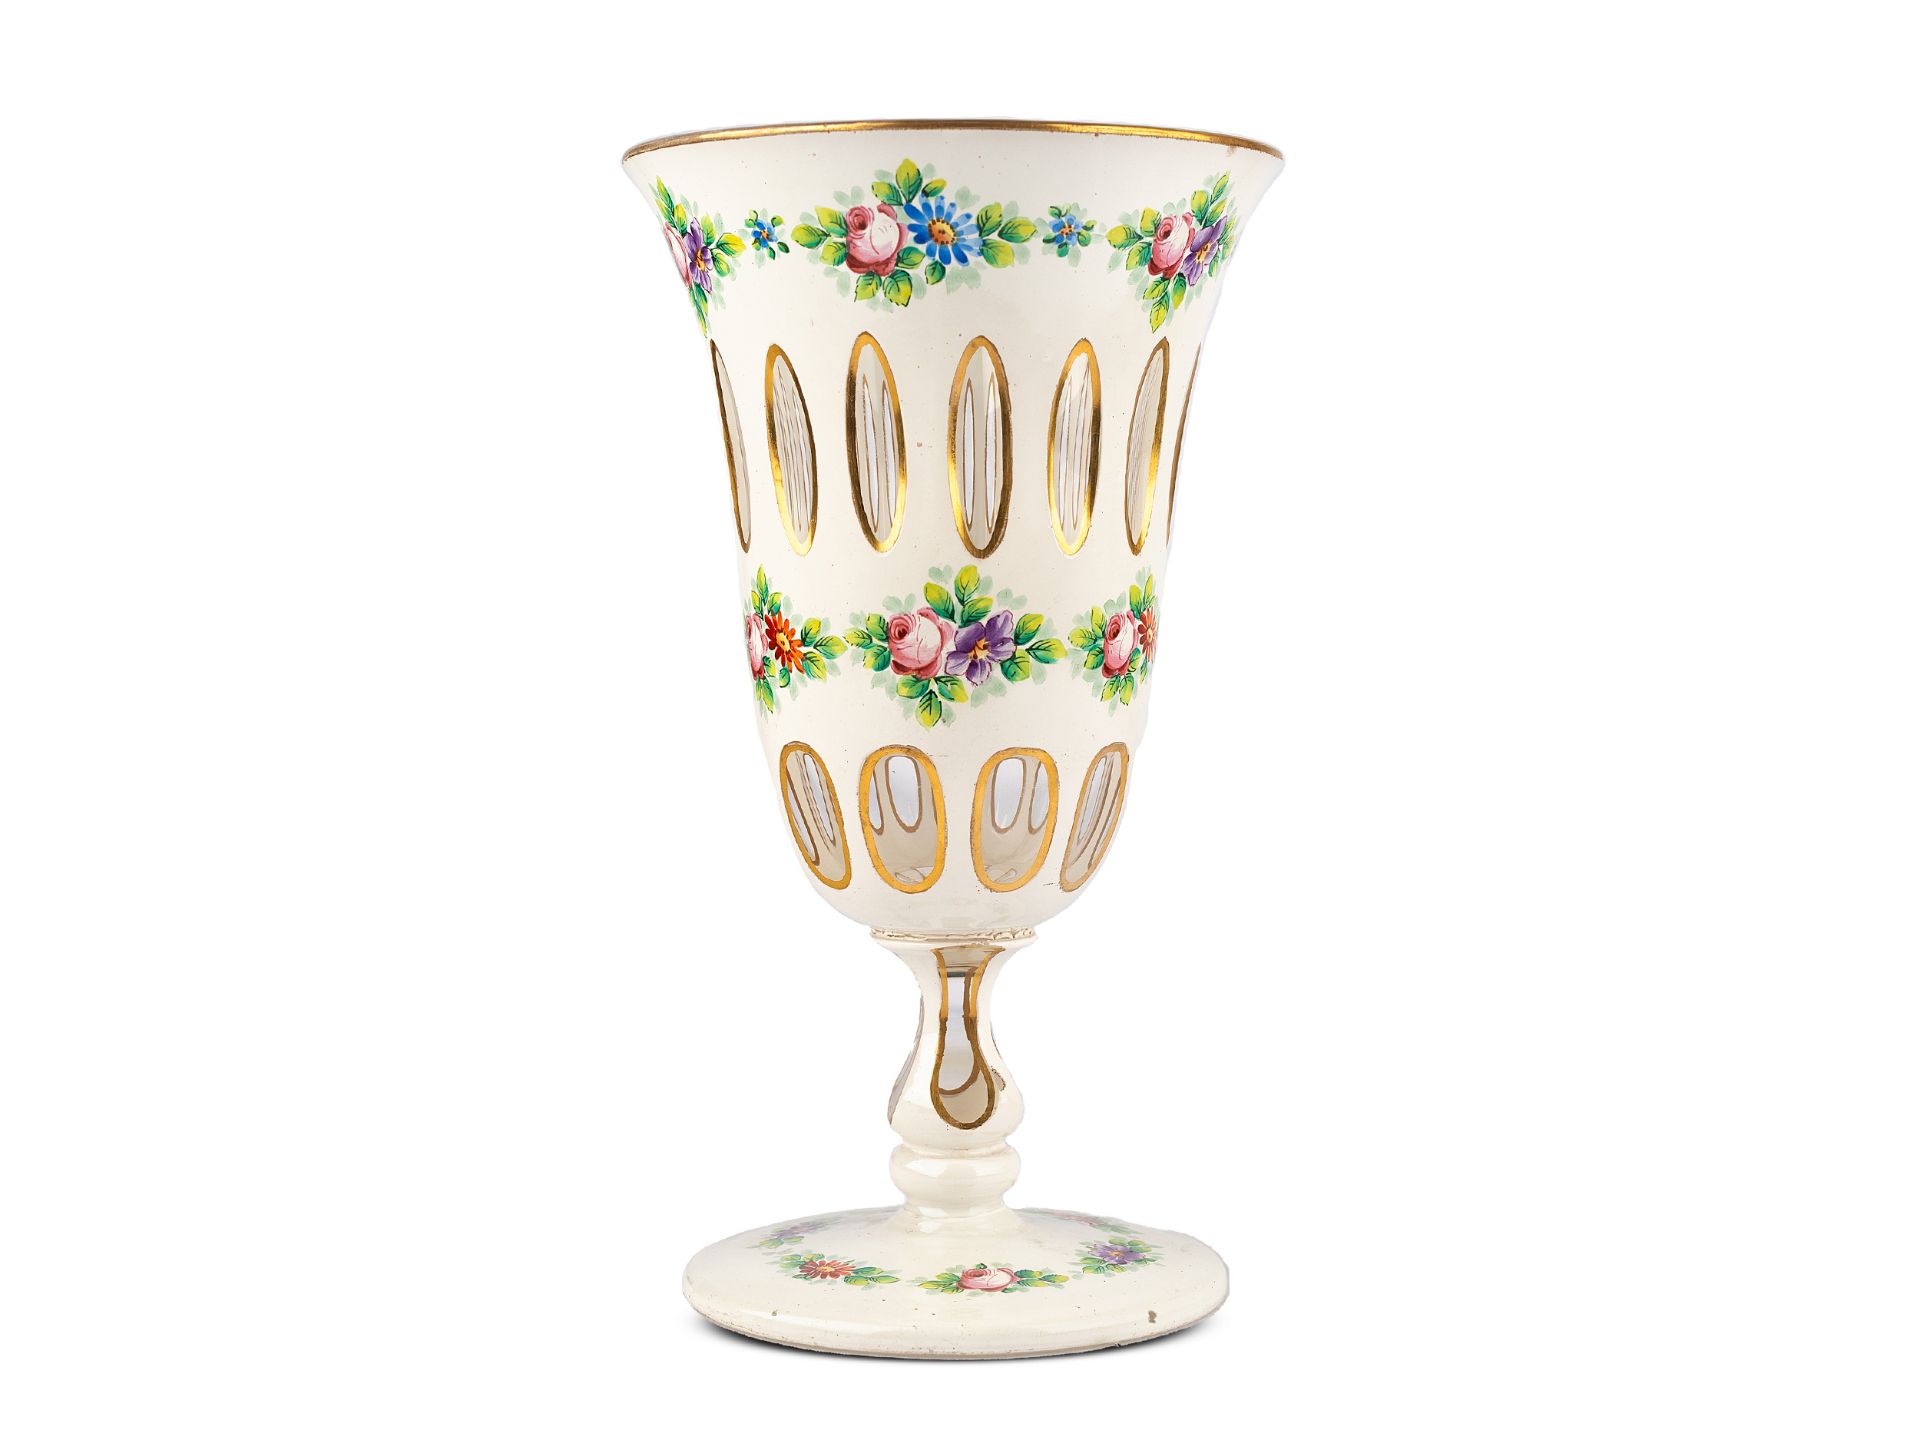 Biedermeier cup with floral motifs, Around 1840, Colourless glass, white overlay, gold-painted